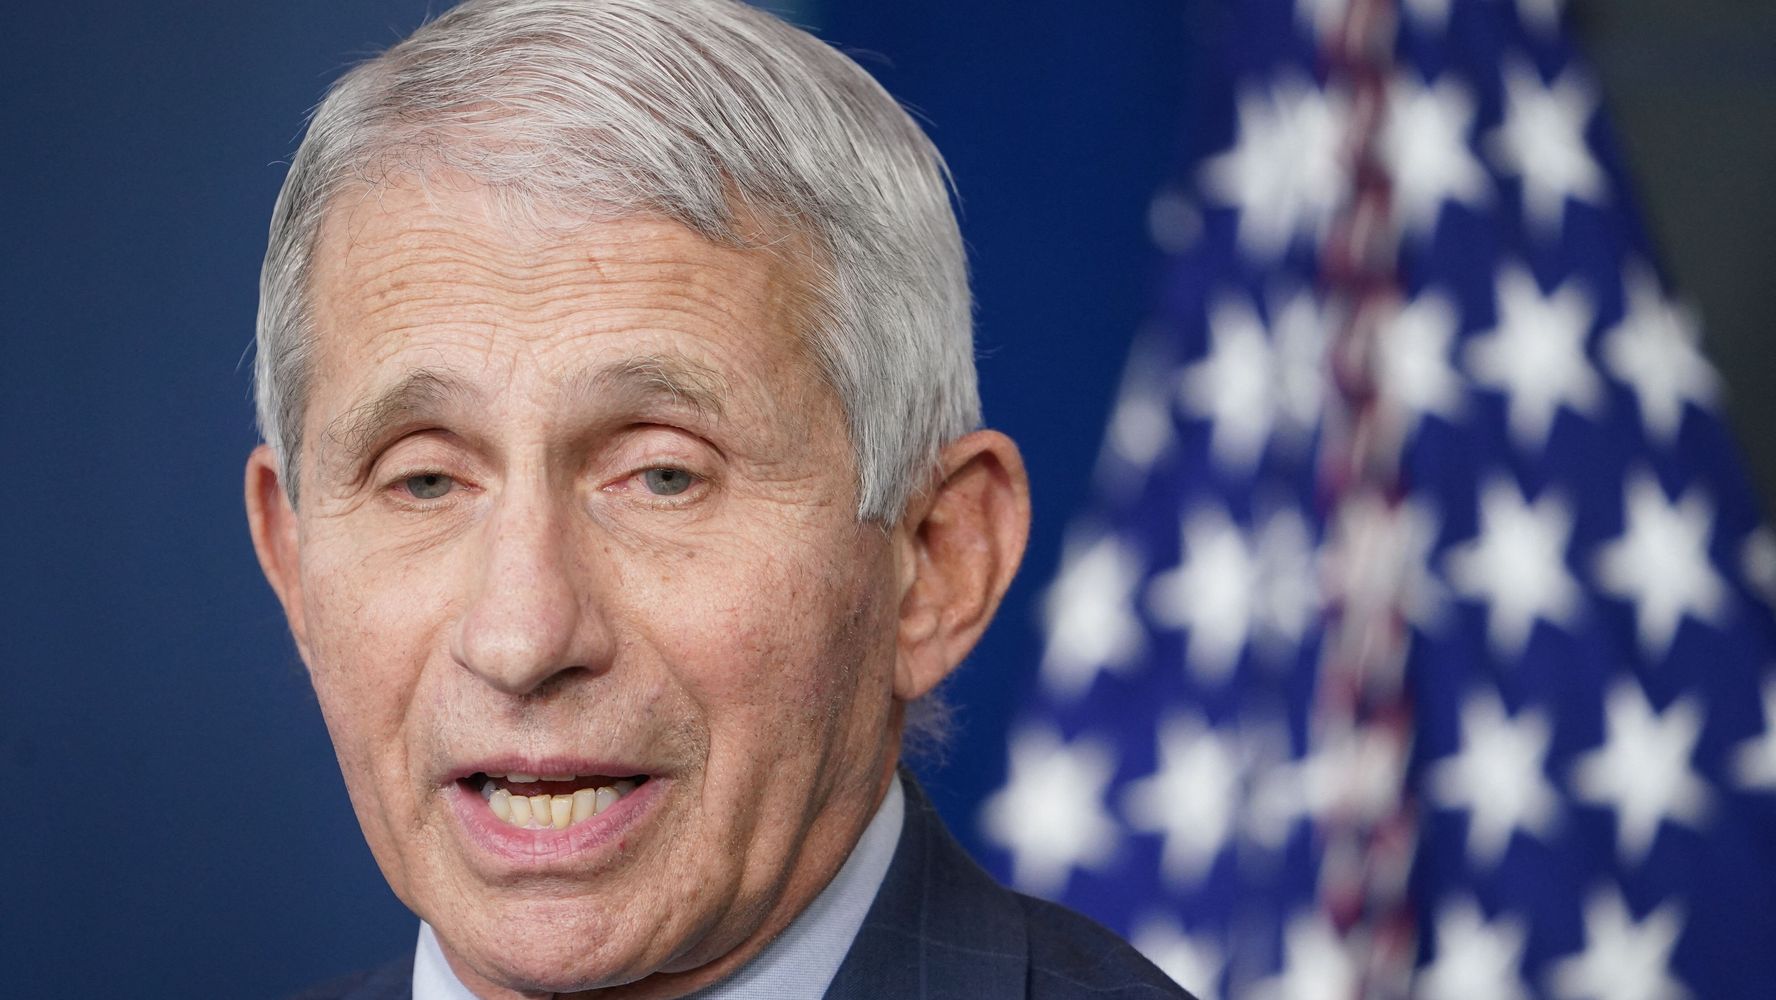 Fauci Fires Back At GOP Sen. Ron Johnson's 'Preposterous' Claim He Overhyped AIDS | HuffPost Latest News